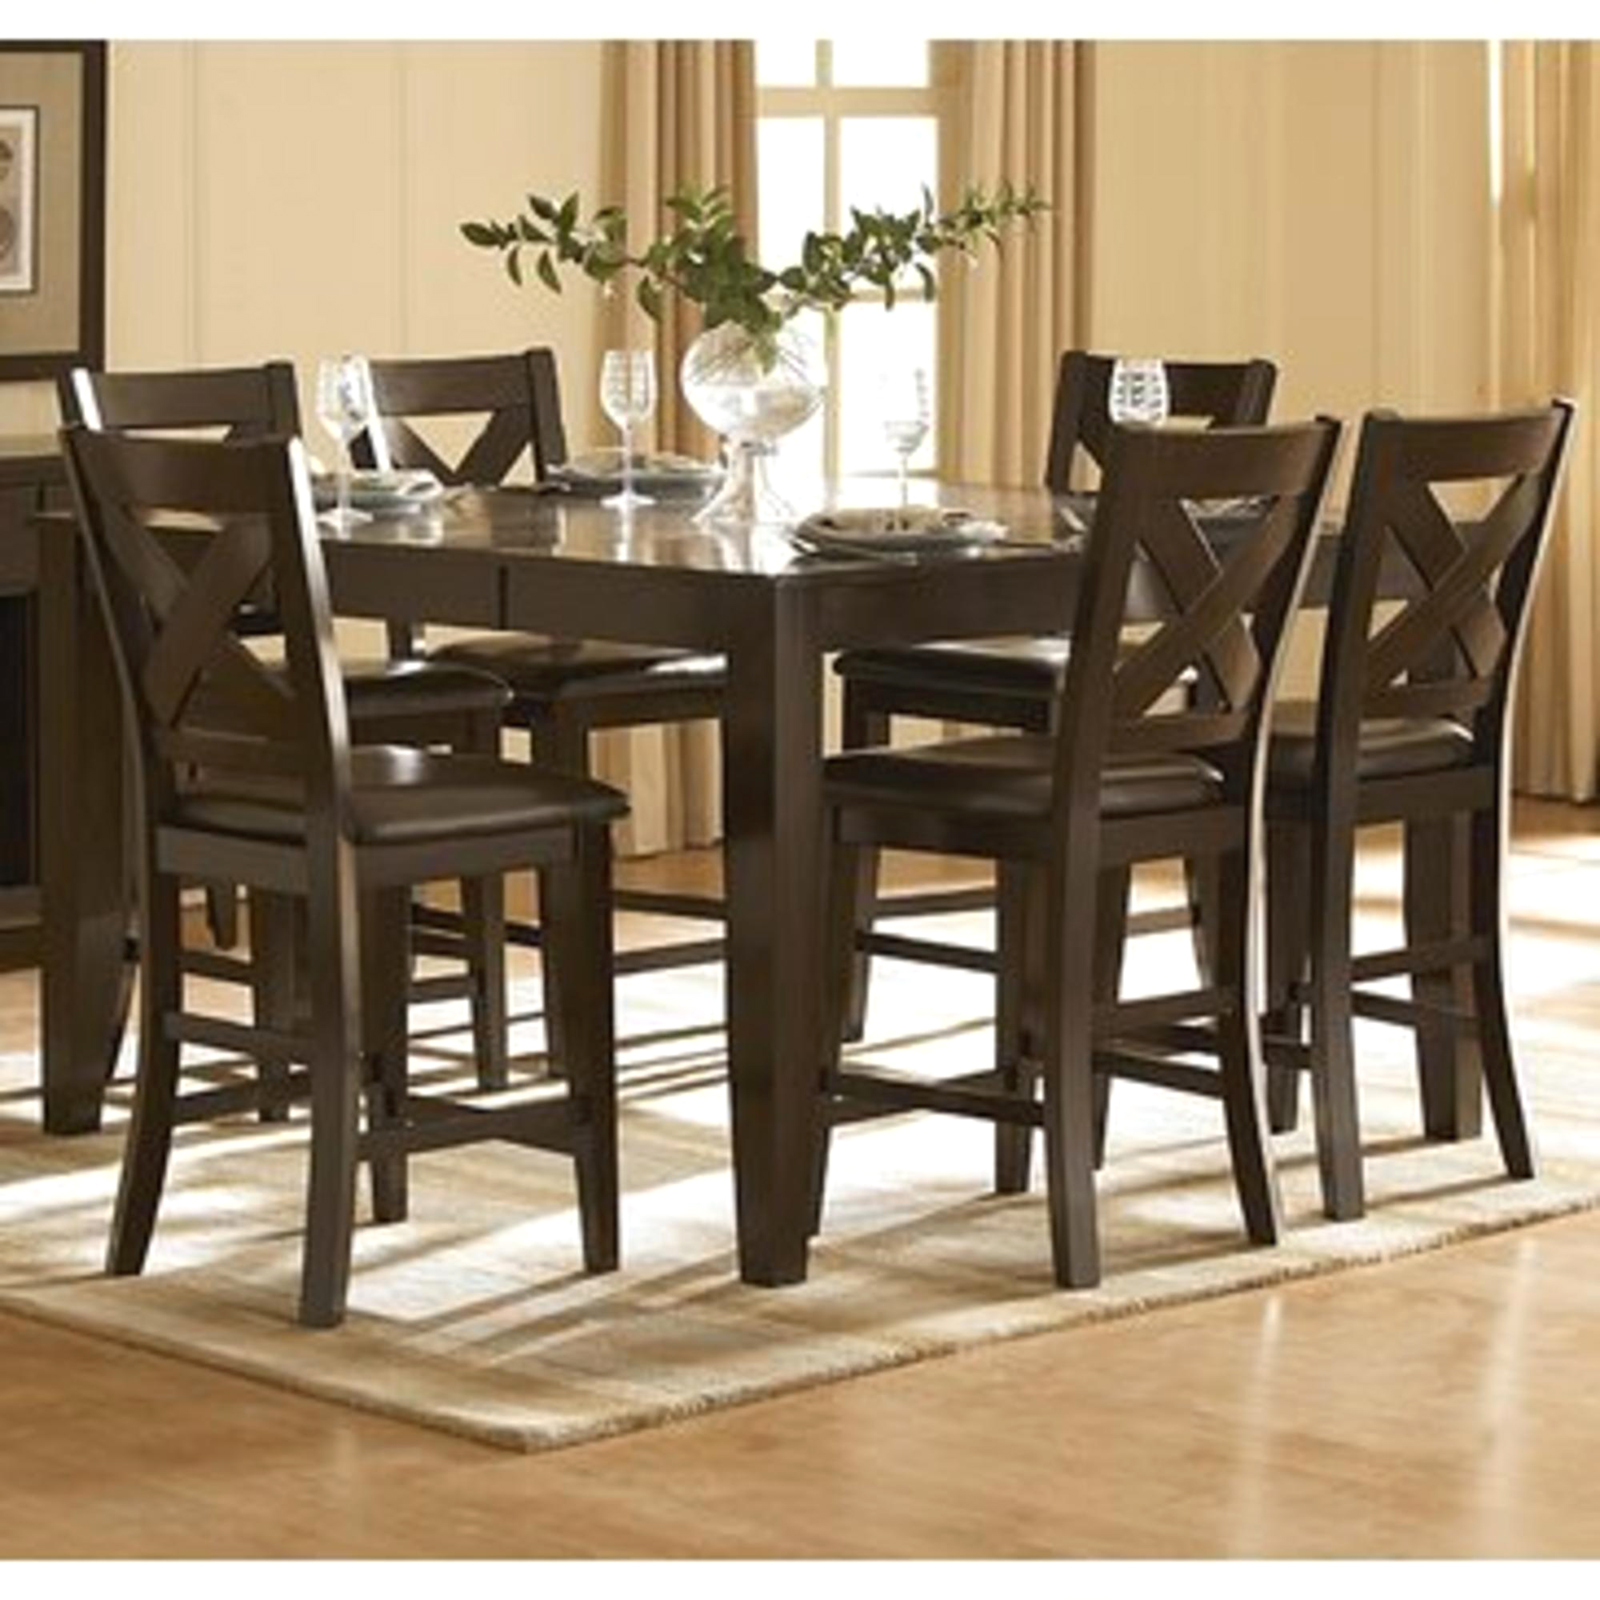 Homelegance Crown Point Square Counter Height Dining Table - Merlot